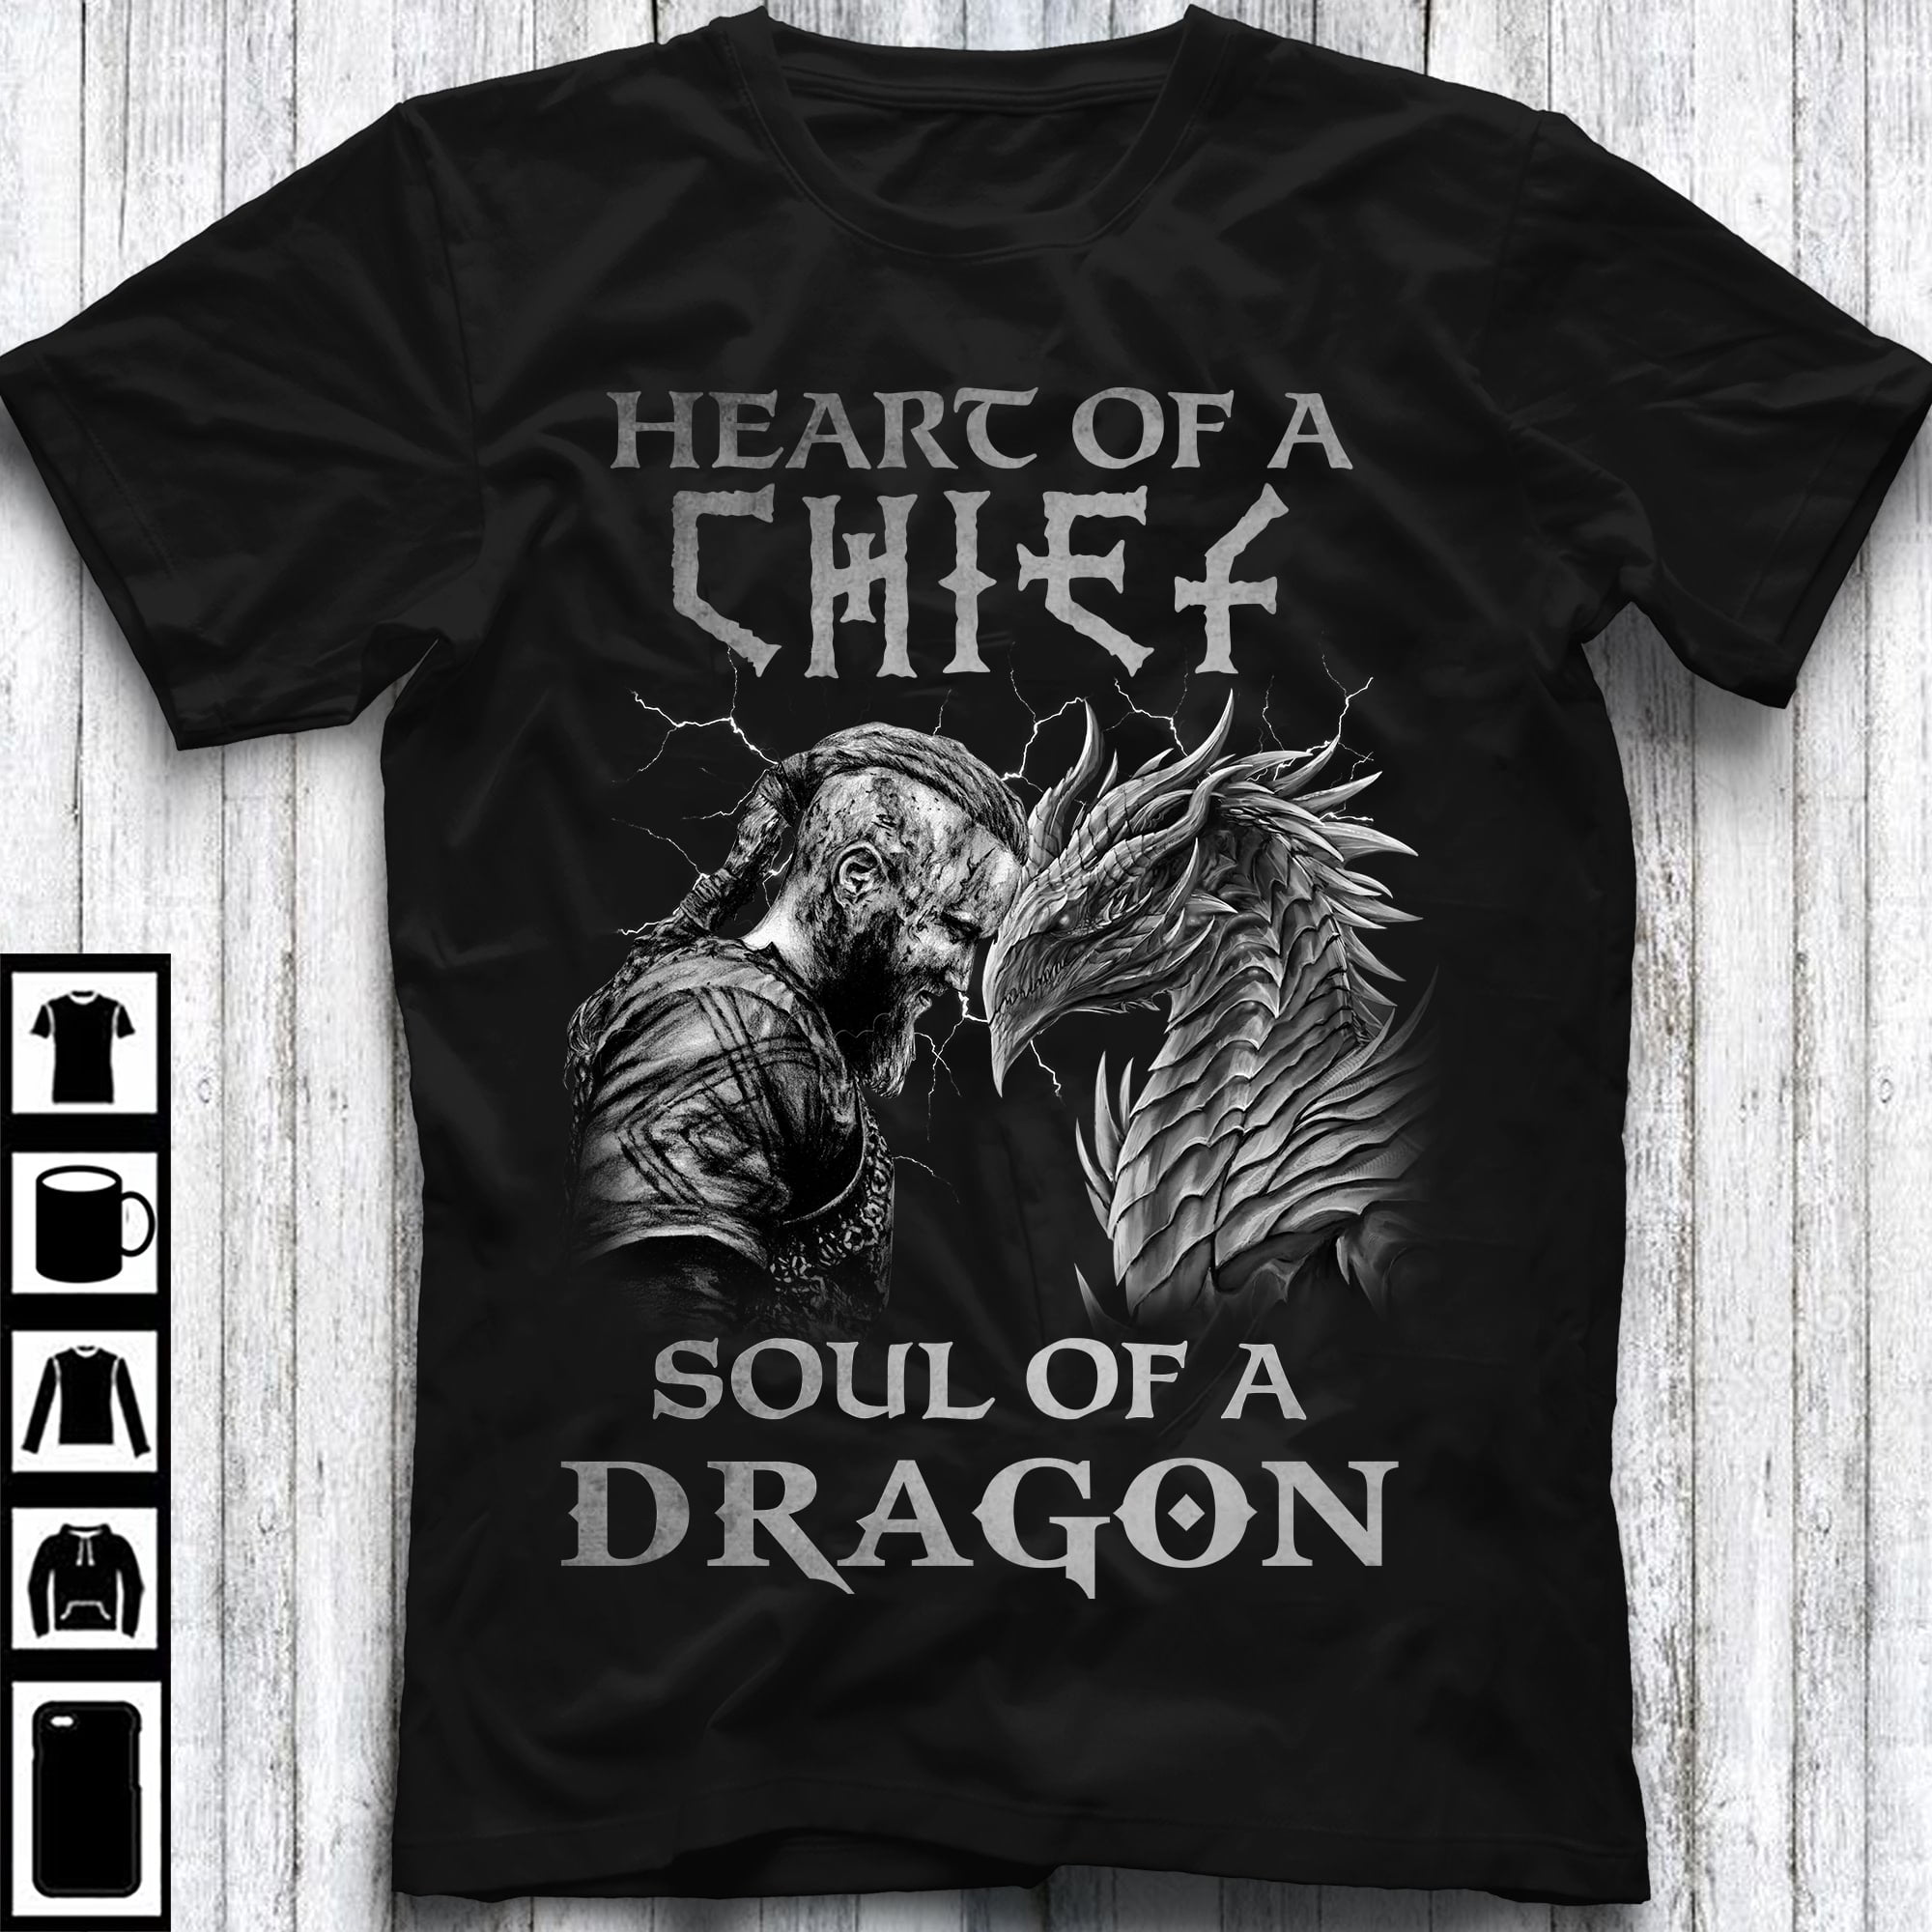 Heart of a chief soul of a dragon